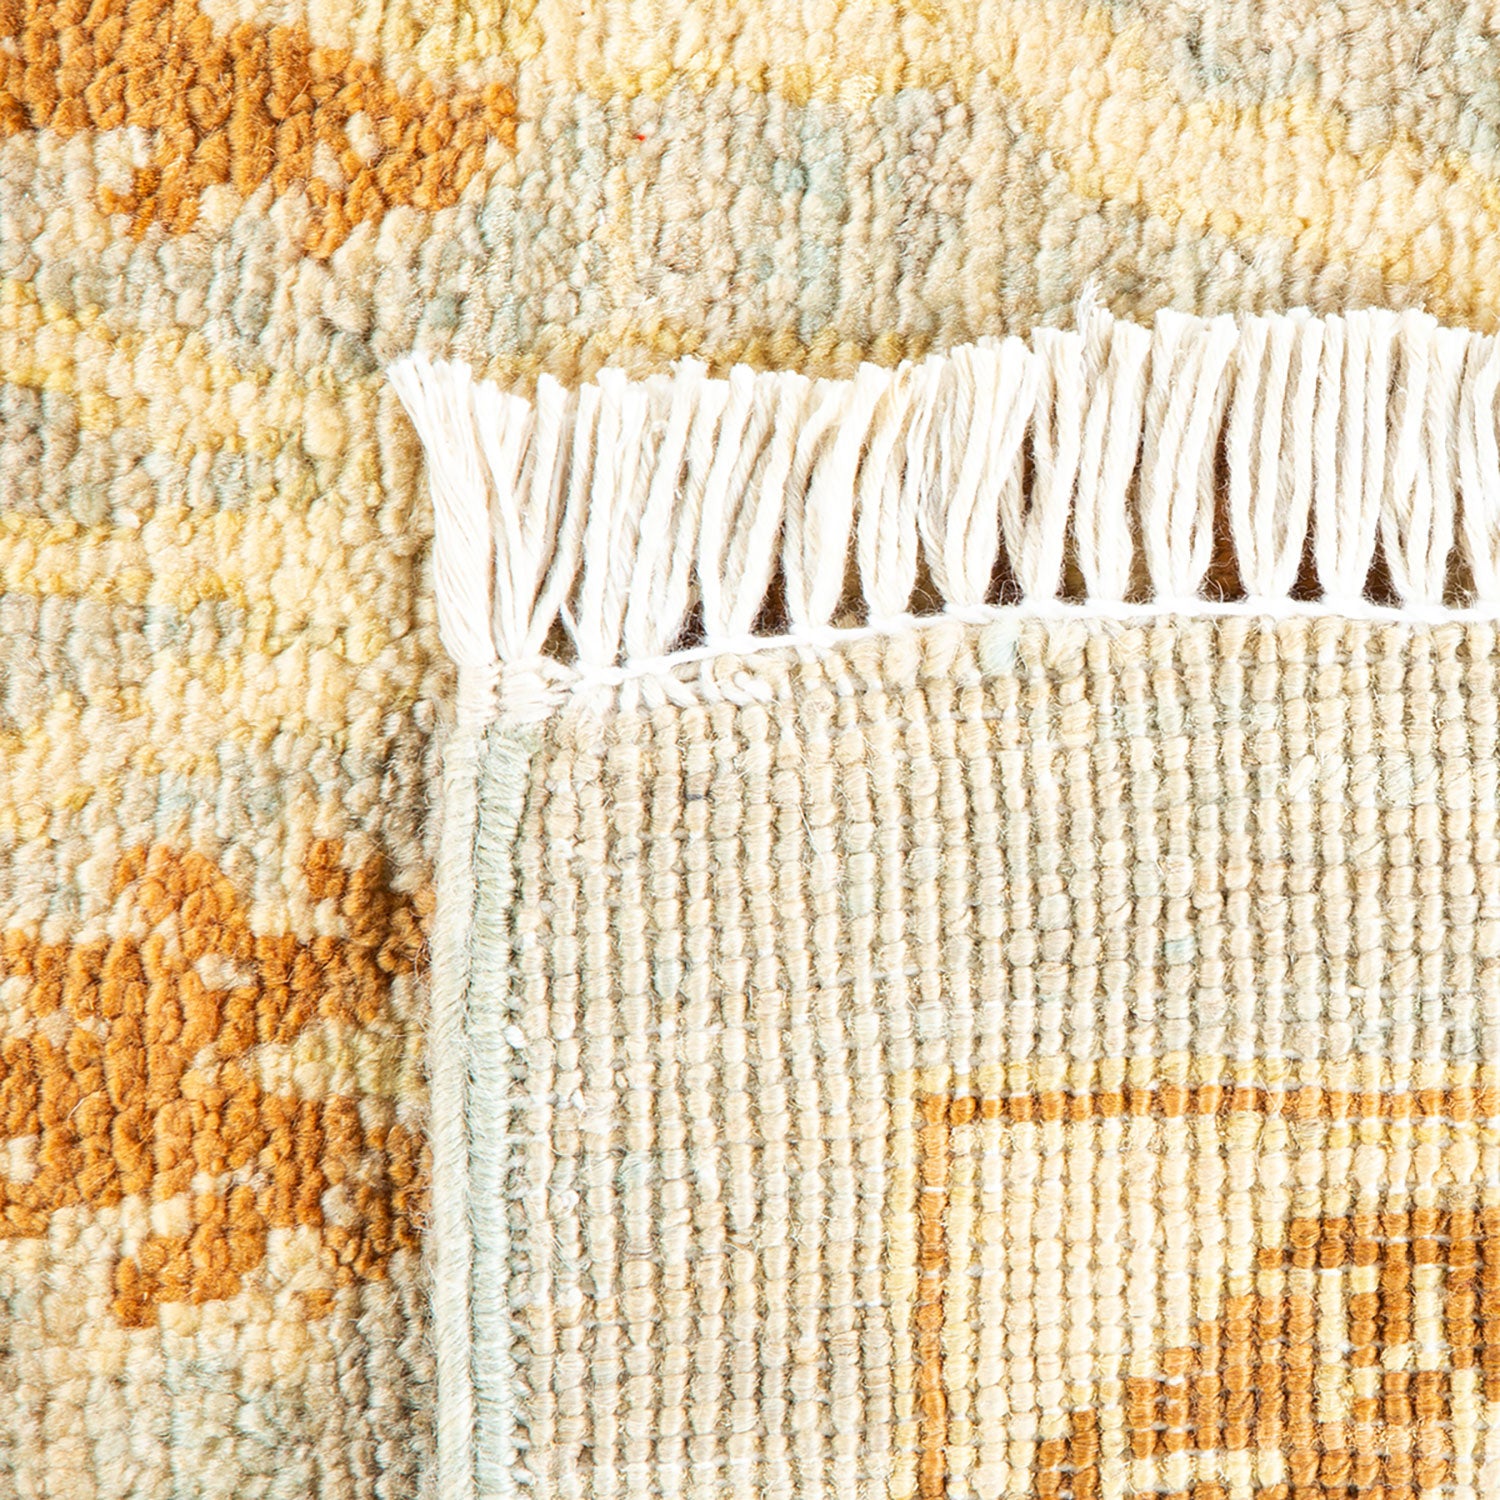 Close-up view of a plush carpet with intricate textured design.